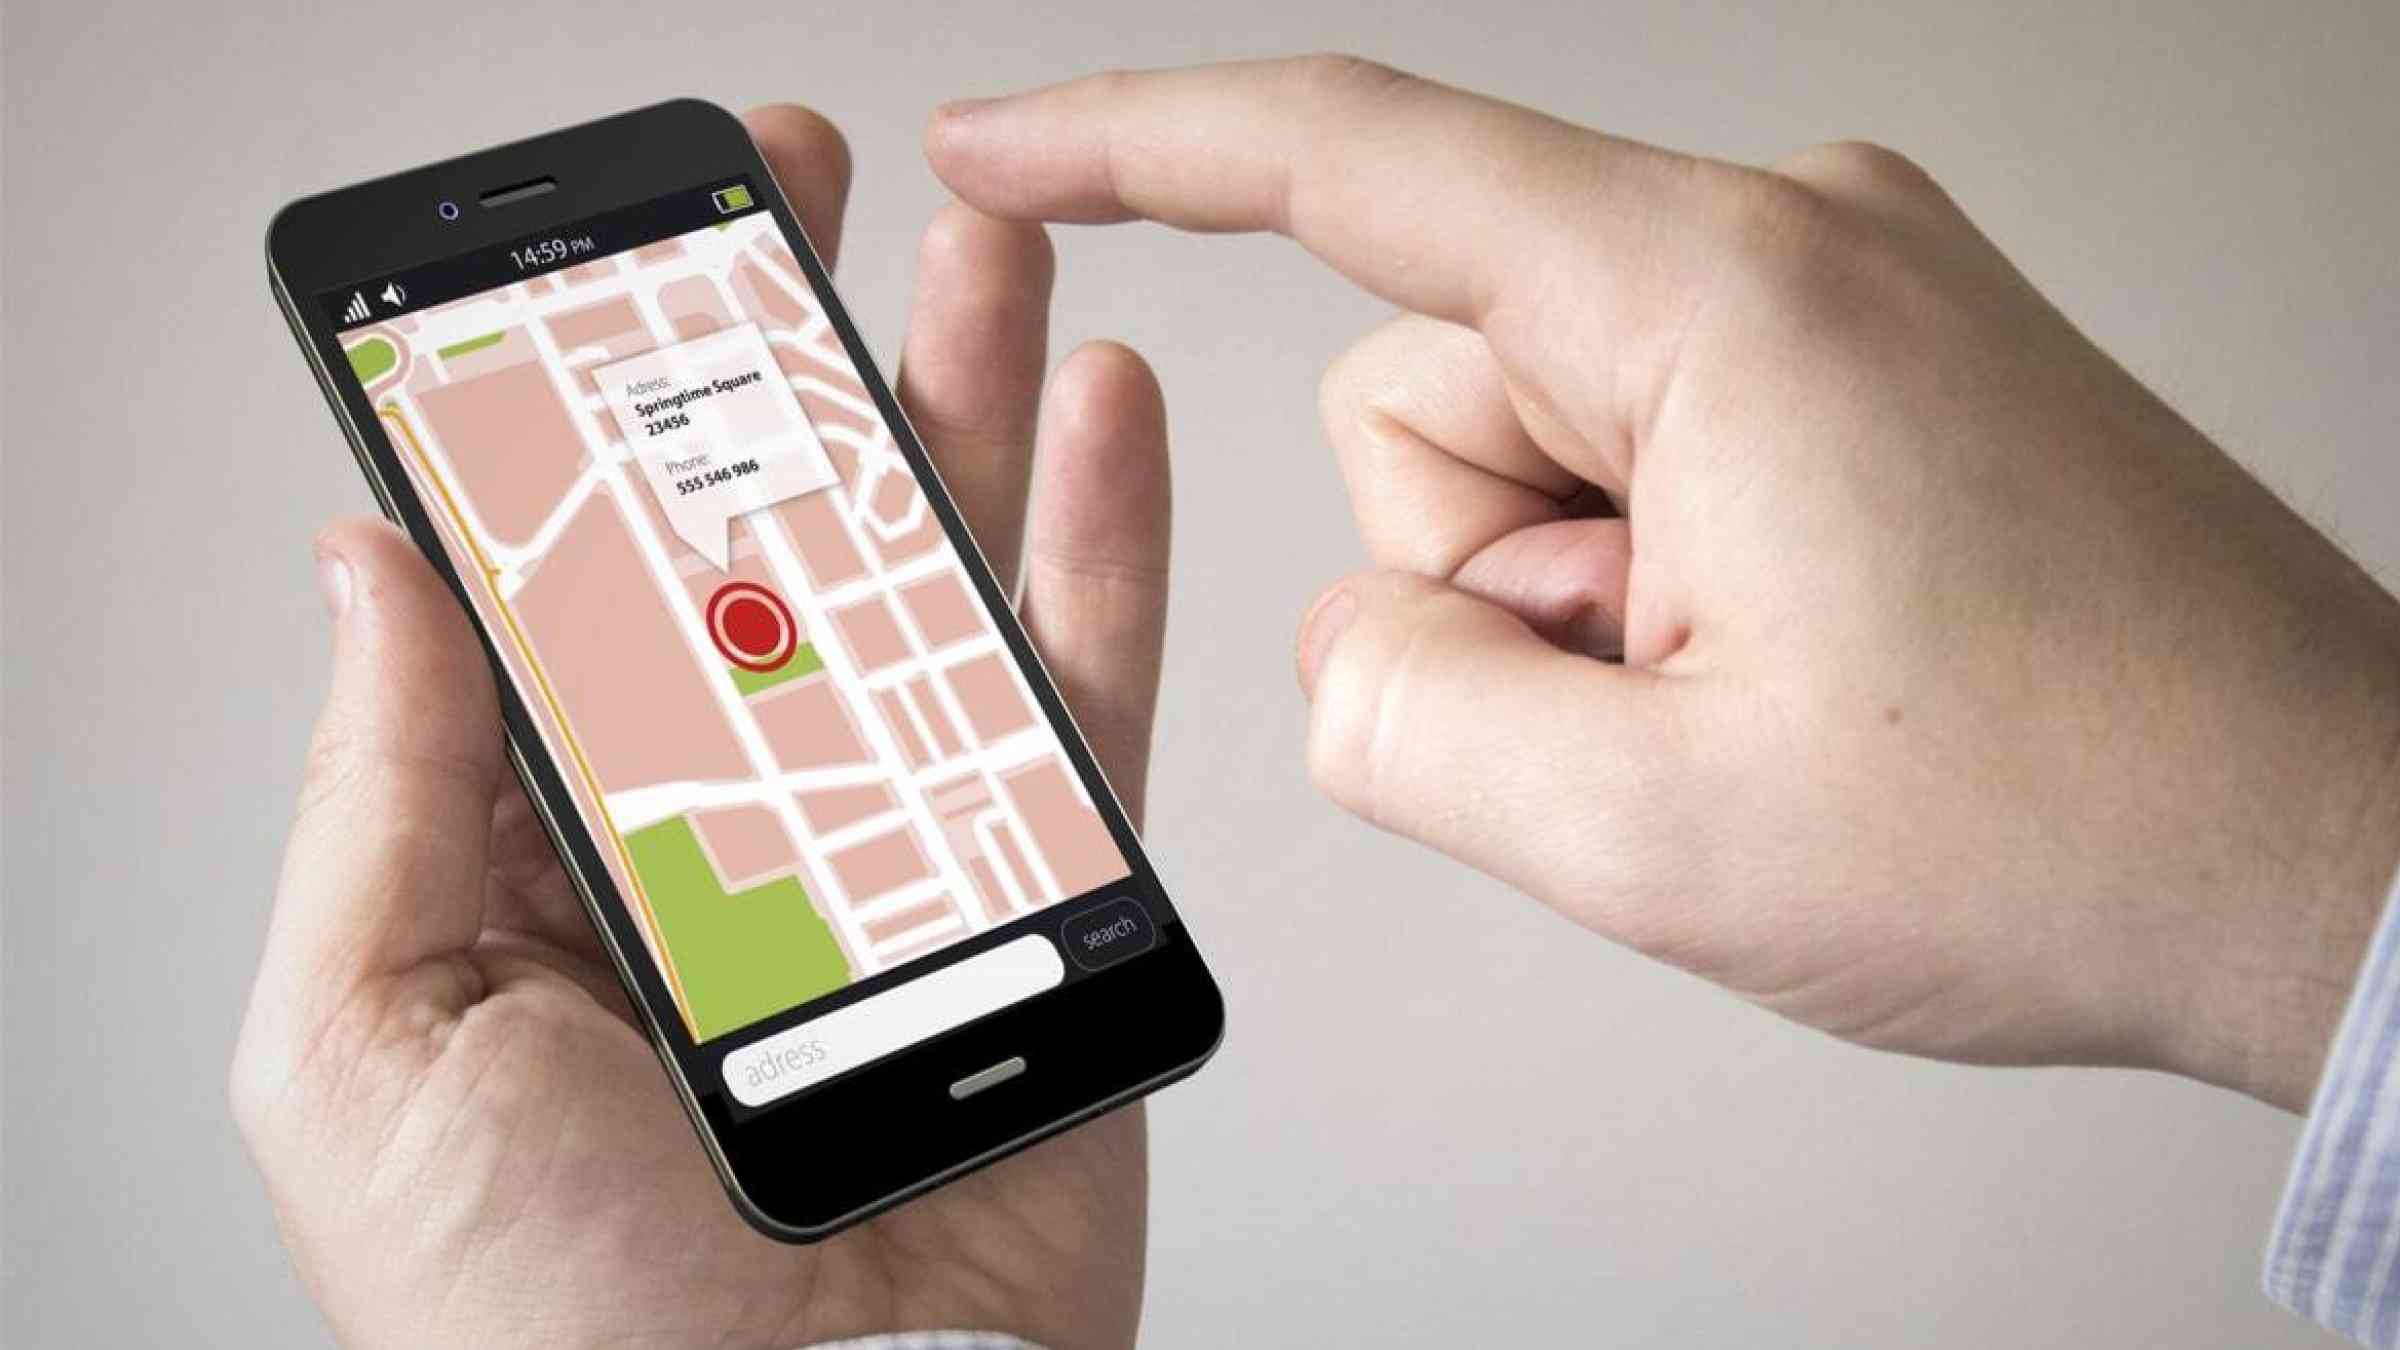 Hands using a smartphone, displaying a street map